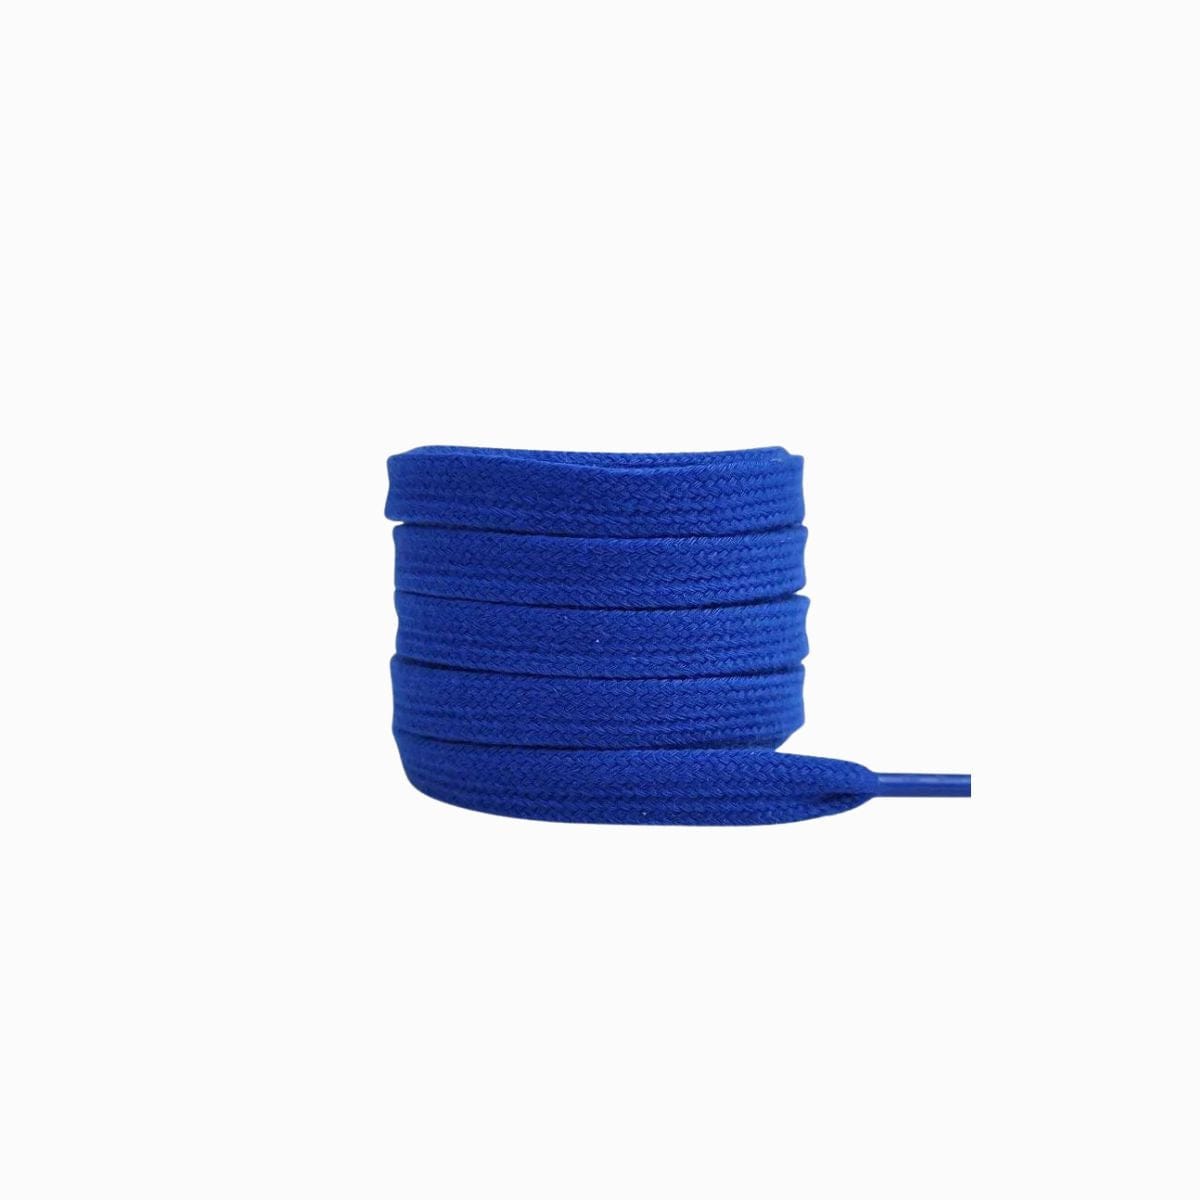 Royal Blue Replacement Converse Laces for Converse Run Star Hike Sneakers by Kicks Shoelaces